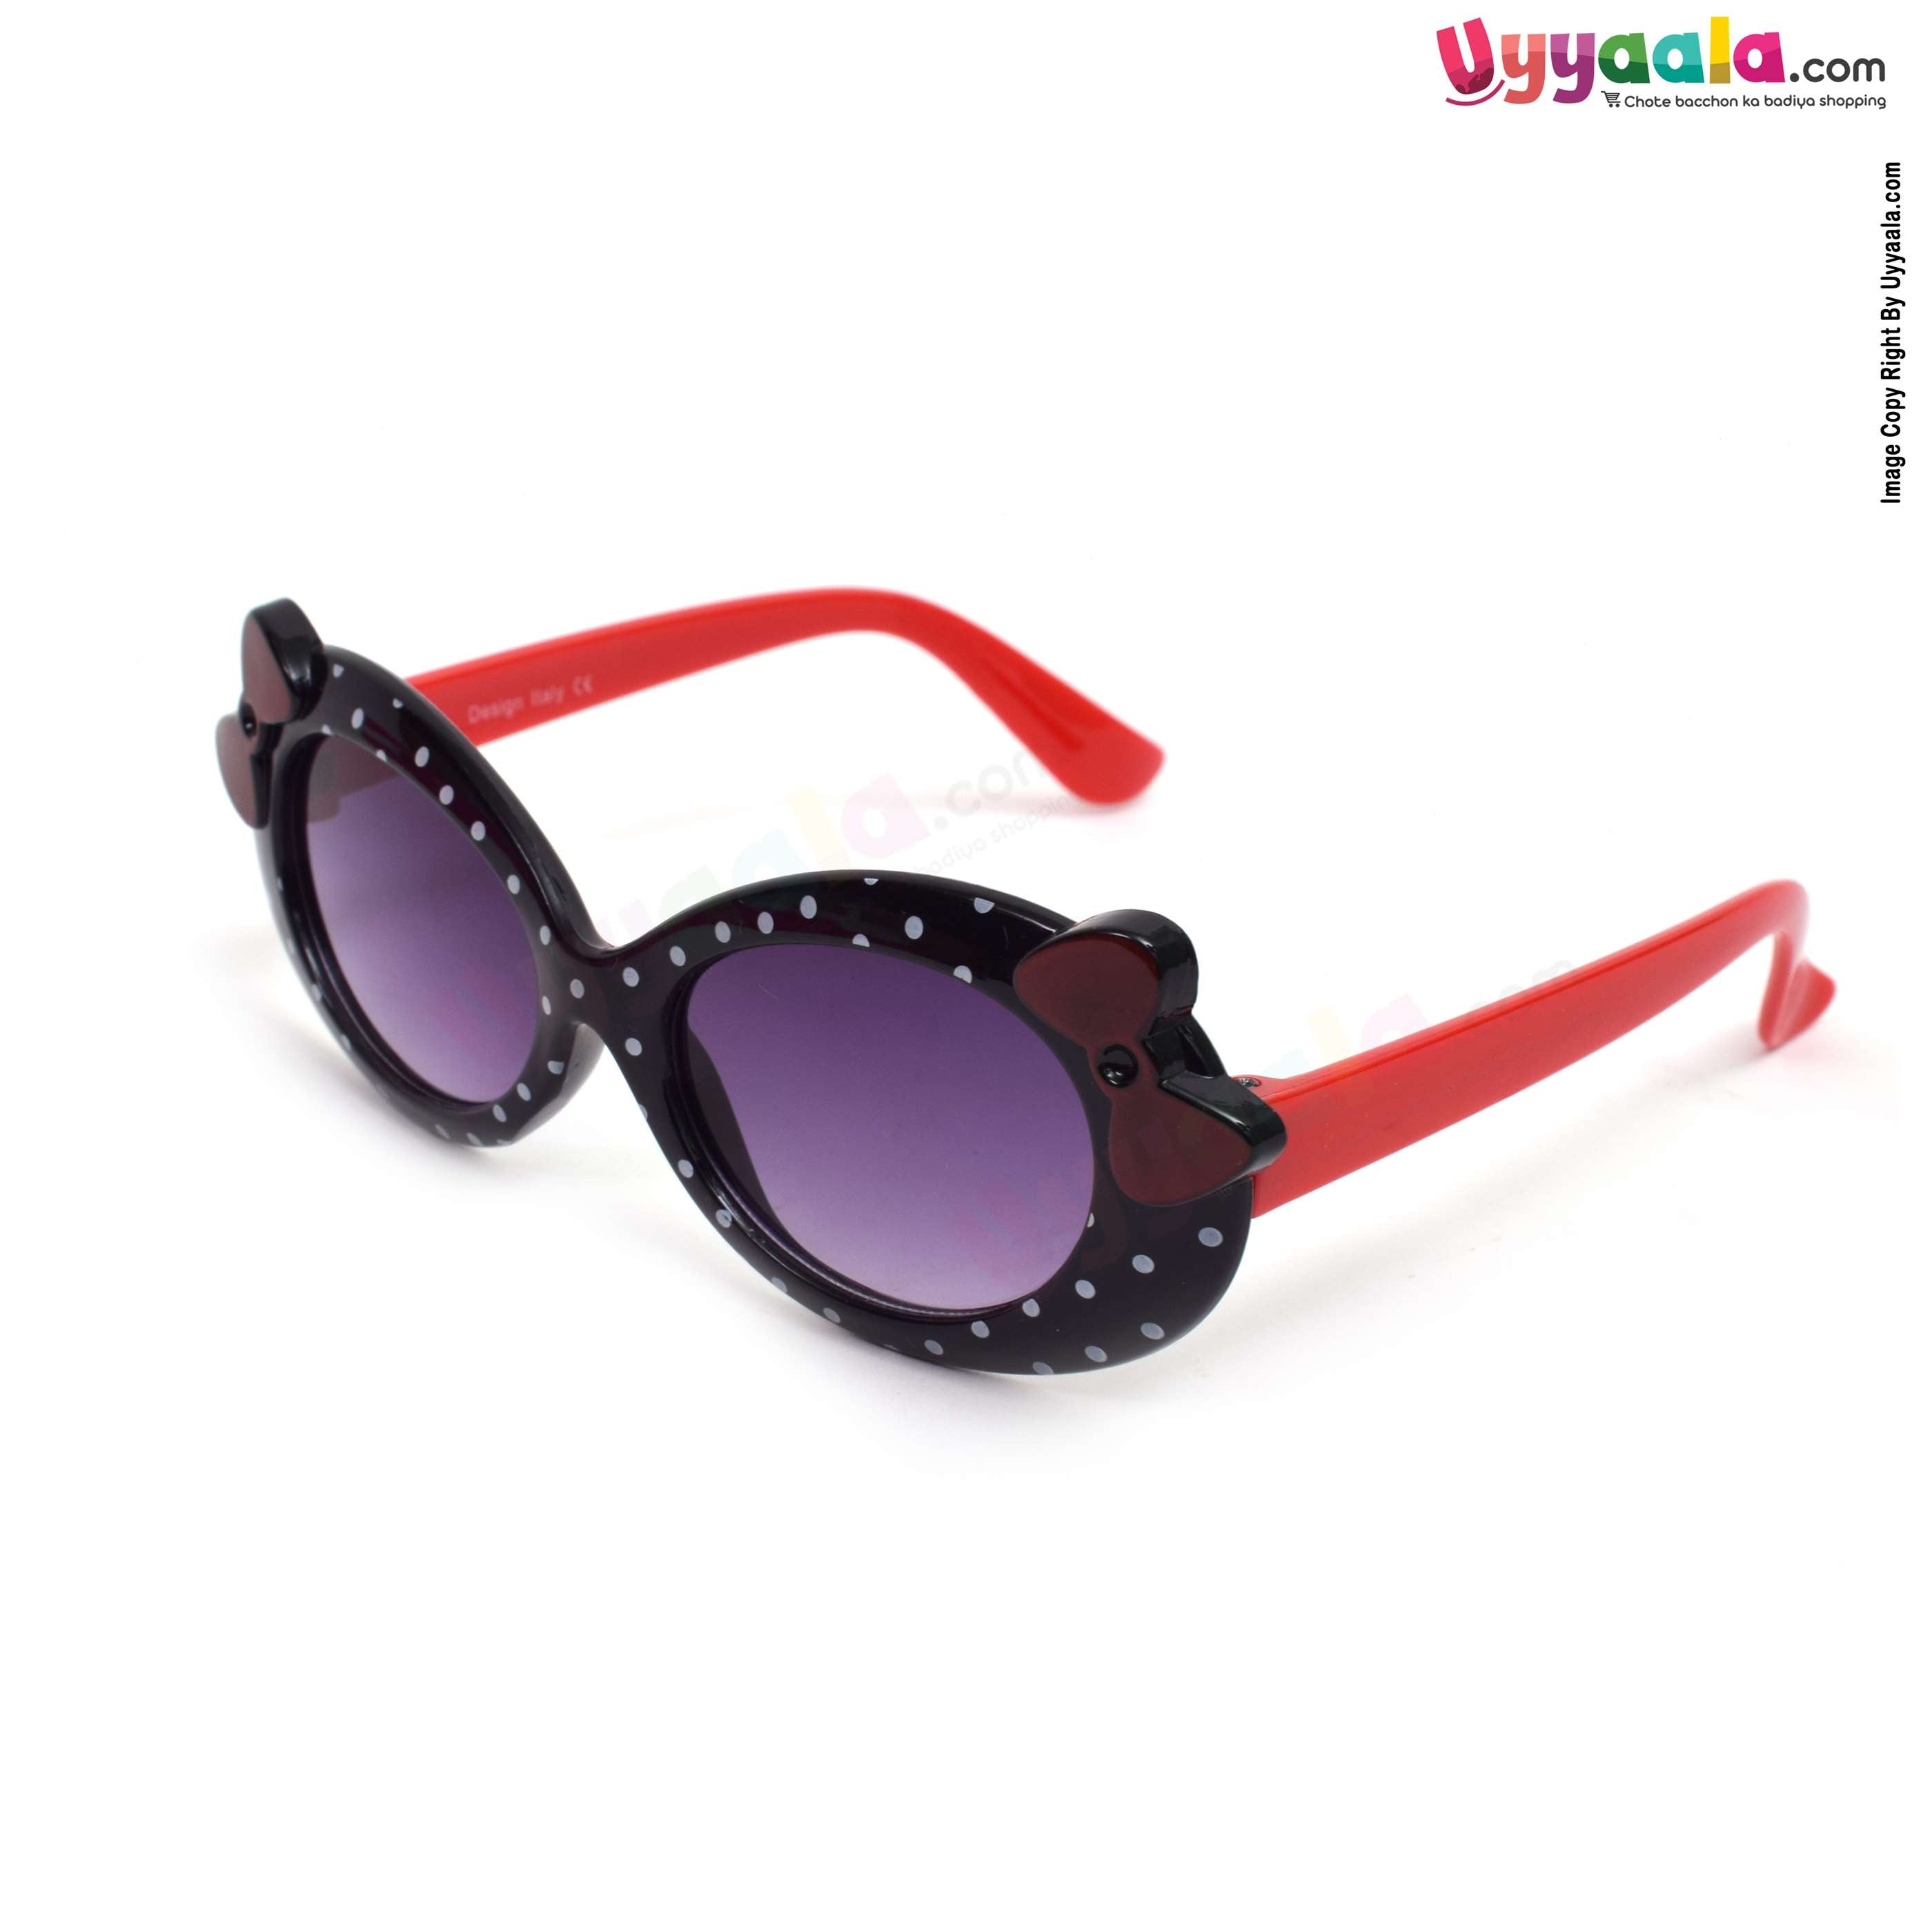 Stylish cat eye shaped tinted sunglasses for kids - black & red